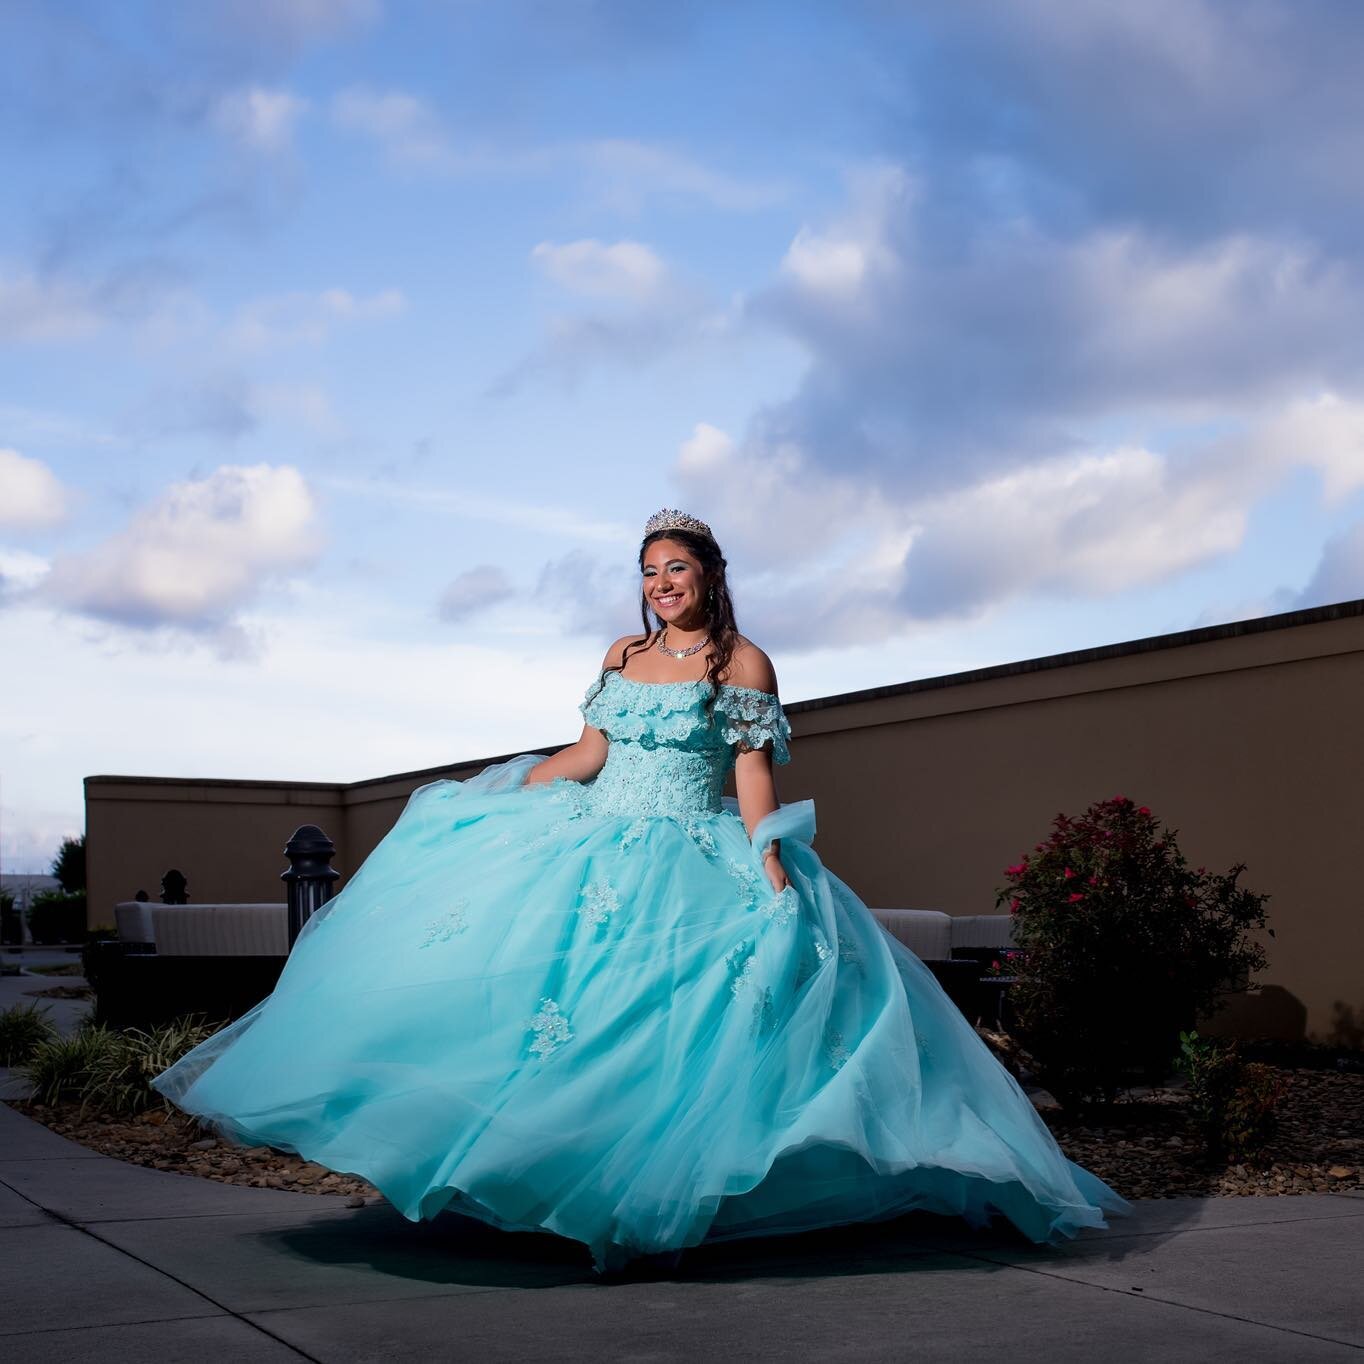 Last night we had the pleasure of photographing Mariana&rsquo;s #quincea&ntilde;era turned #sweet16! Covid kept her from having her celebration last year, so this was a combo of sorts, and it did not disappoint! #discoverlovestudios #birthdaygirl #qu